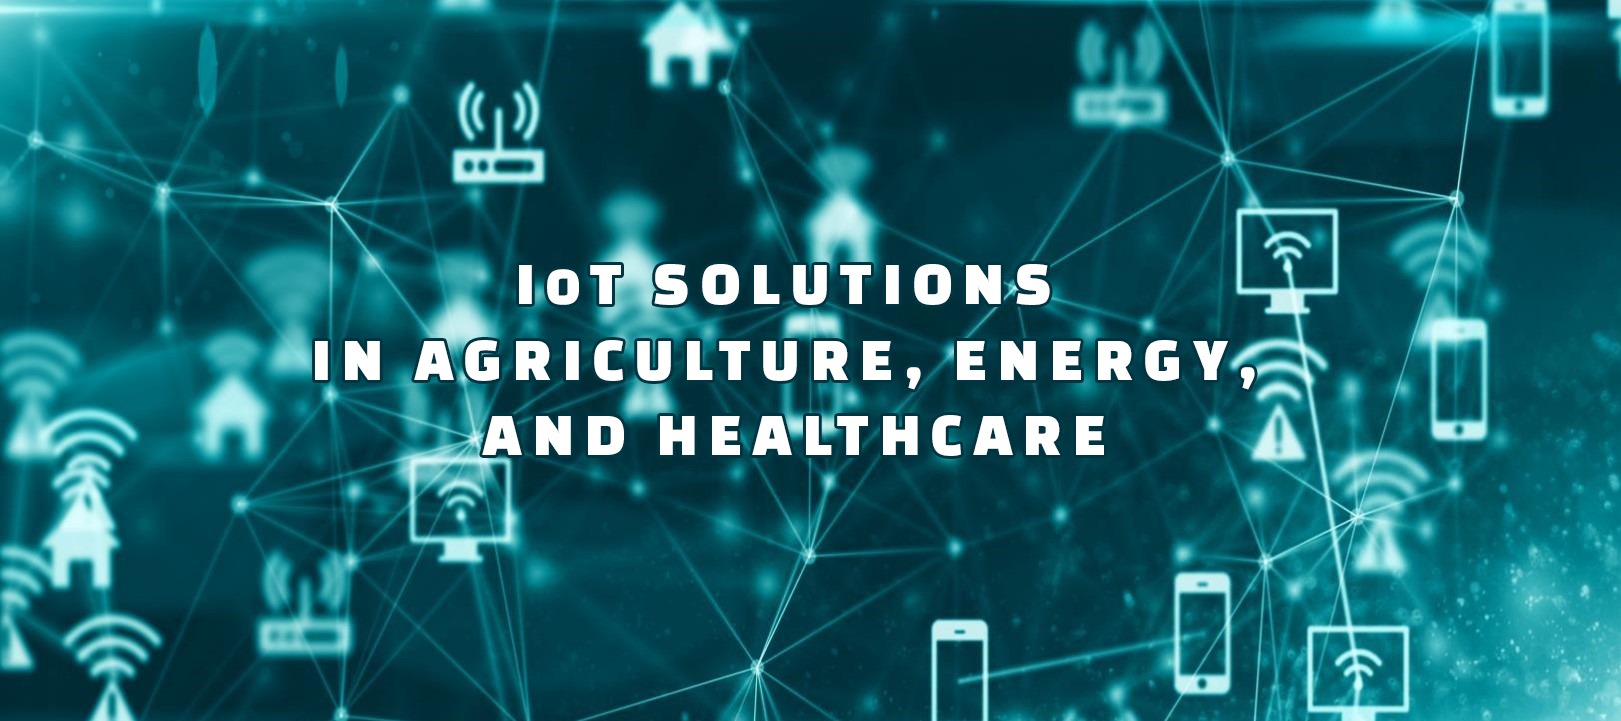 IoT Solutions in Agriculture, Energy, and Healthcare